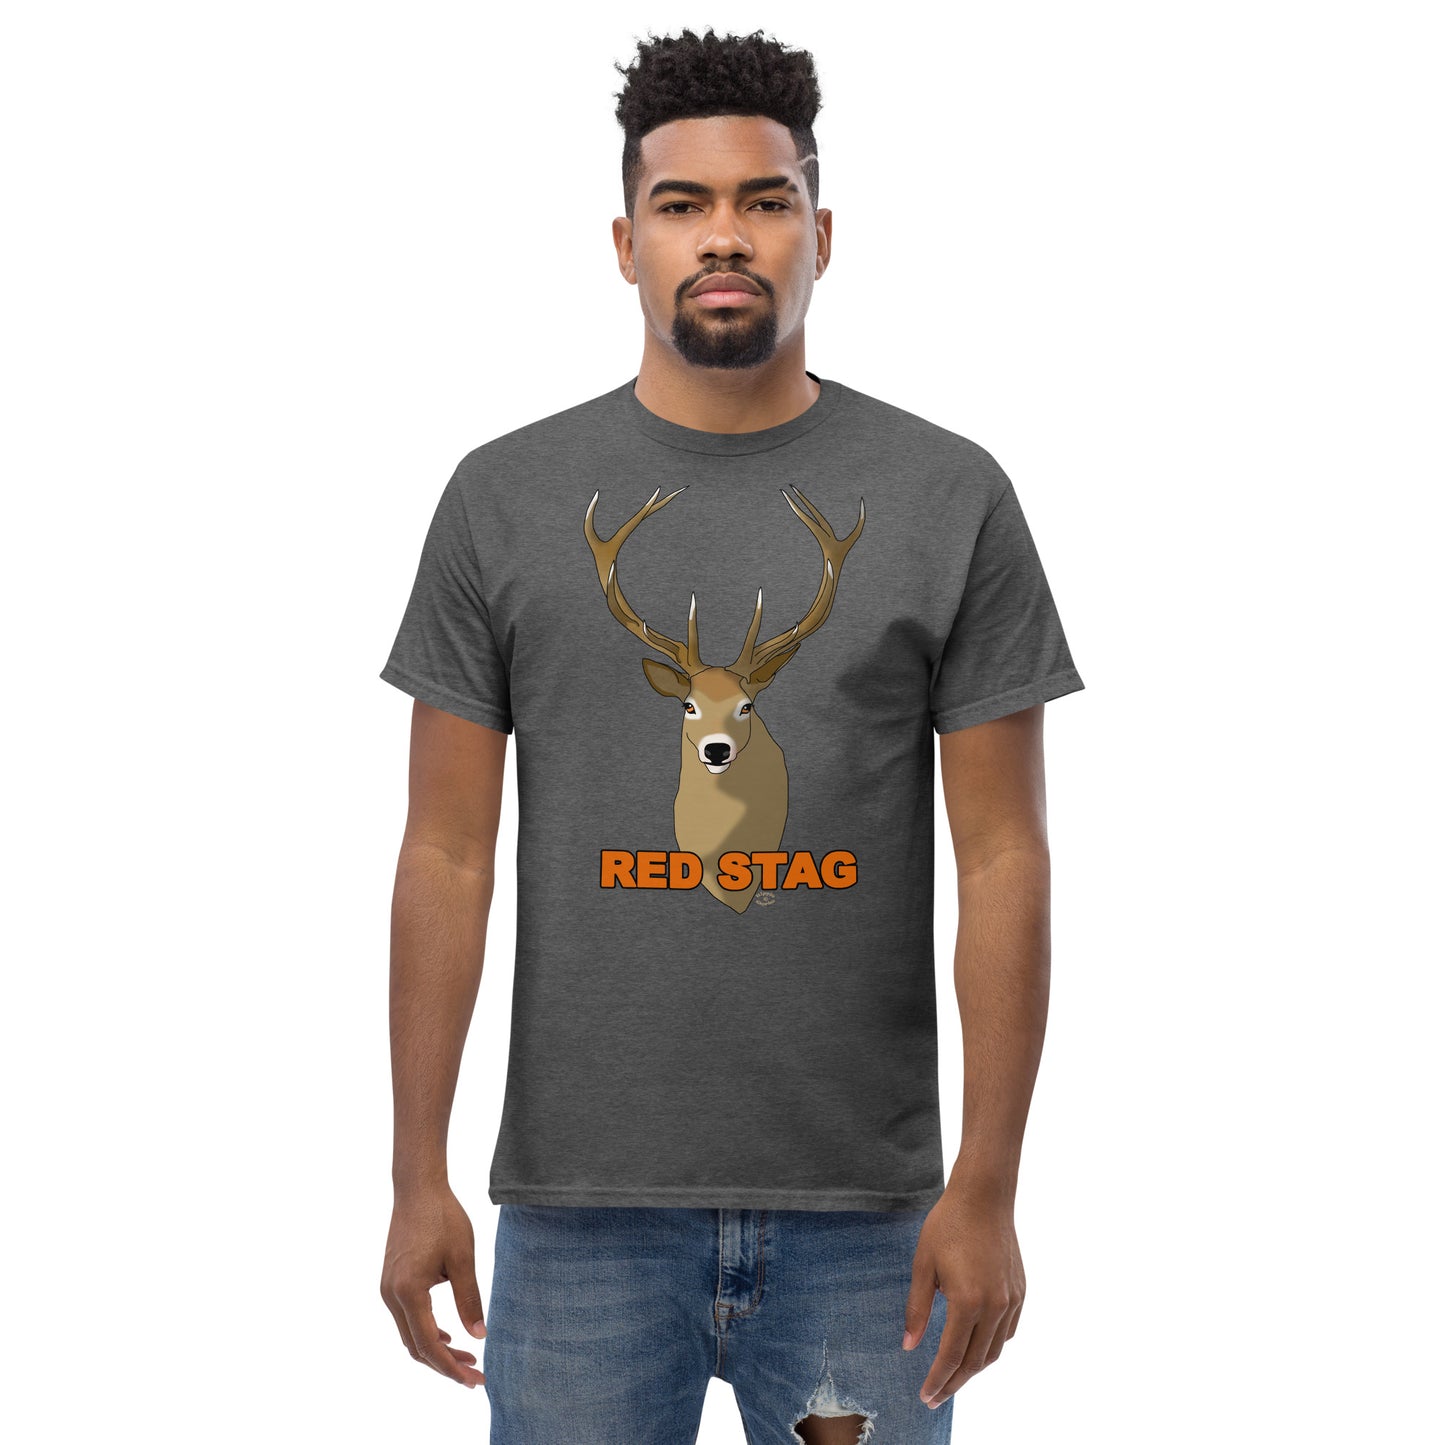 "Red Stag" Men's Classic Tee